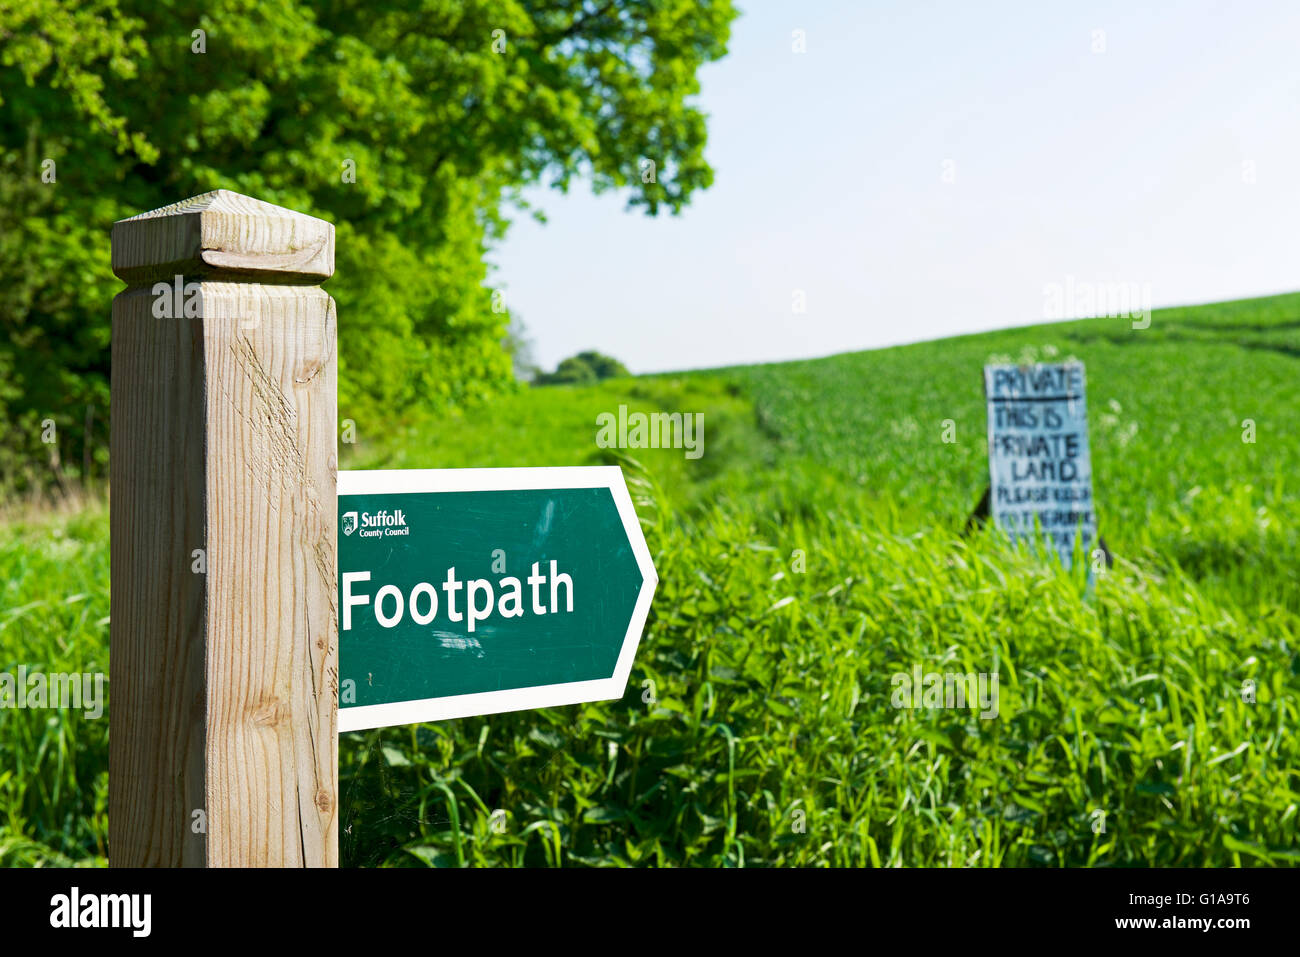 Footpath fingerpost pointing to sign in field saying this is private land, England UK Stock Photo